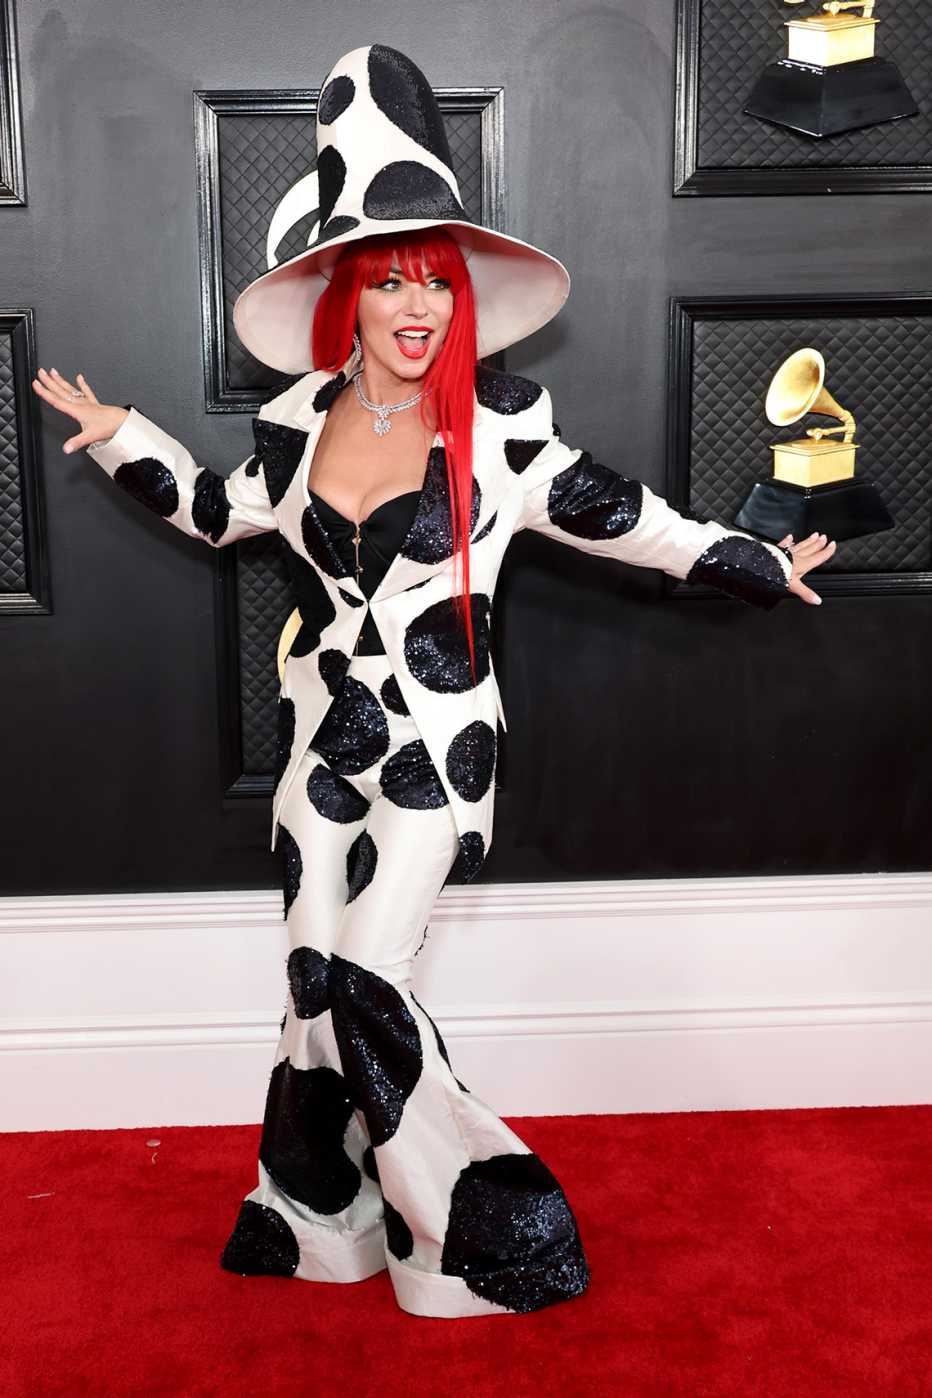 Shania Twain on the red carpet at the 65th Grammy Awards